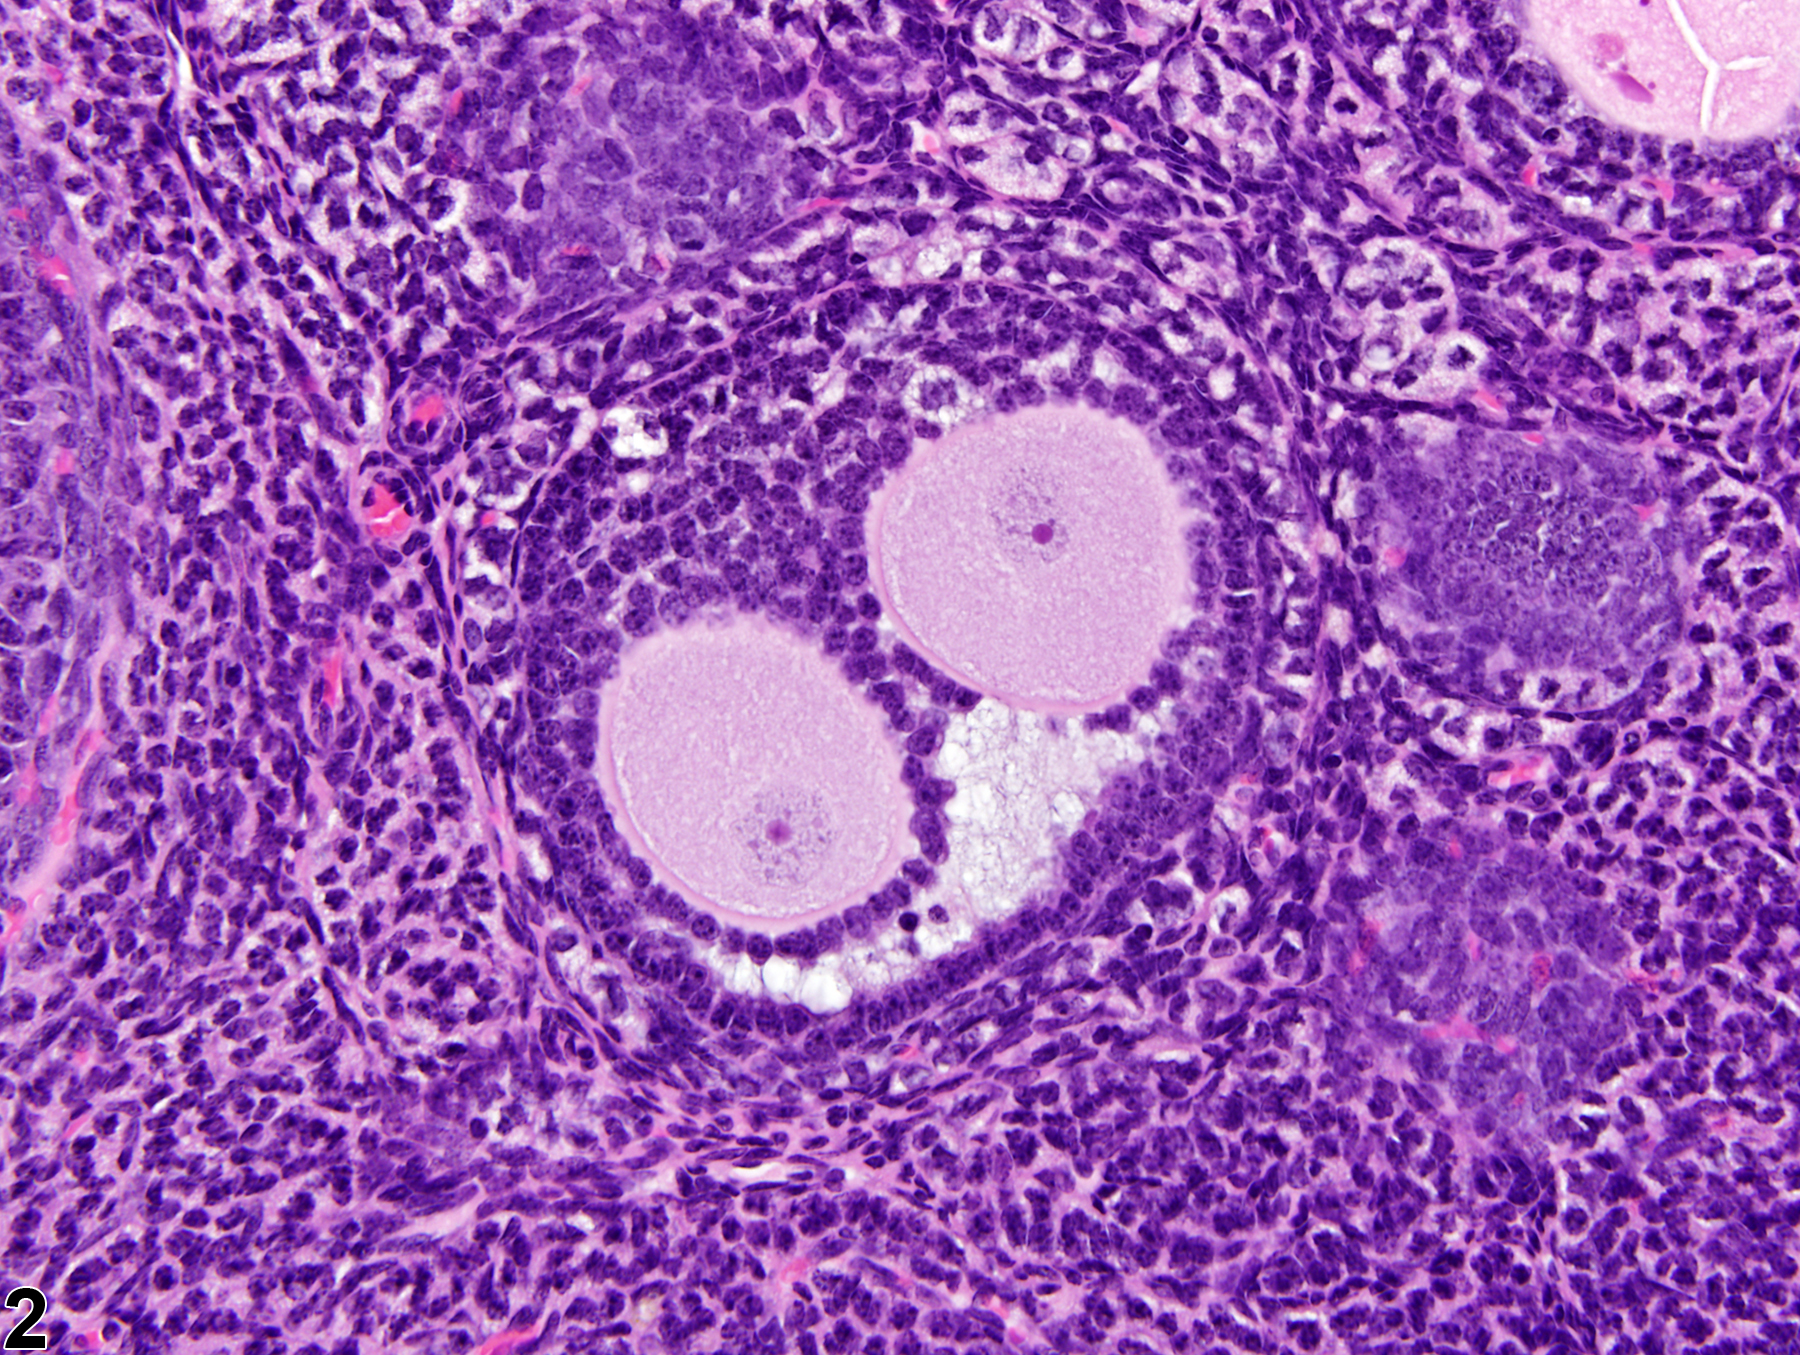 Image of polyovular follicle in the ovary from a female B6C3F1 mouse in a subchronic study